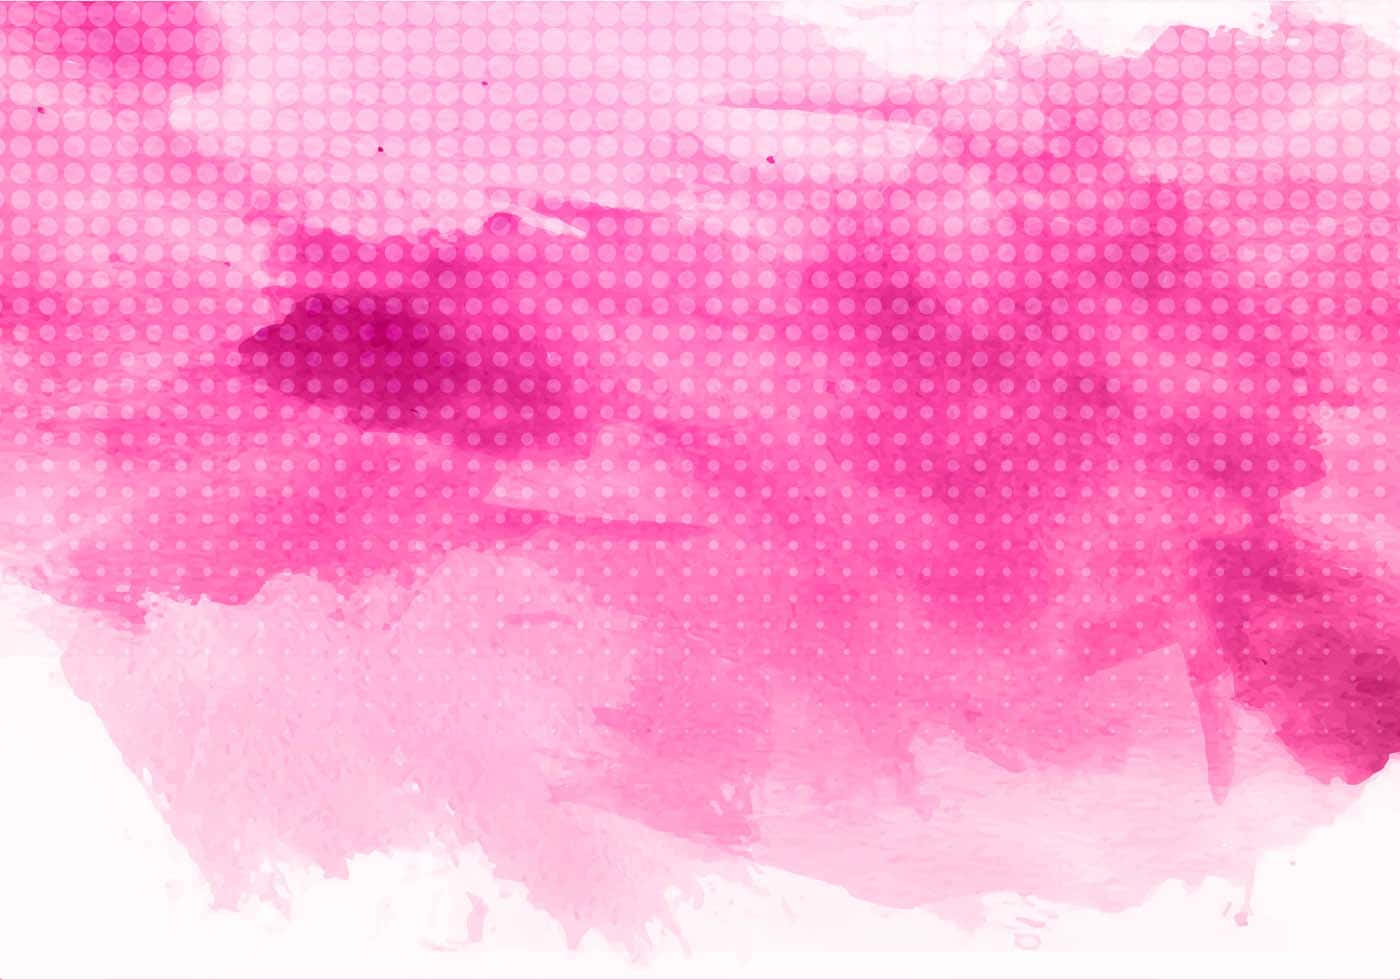 Caption: Serene Pink Watercolor Textured Background